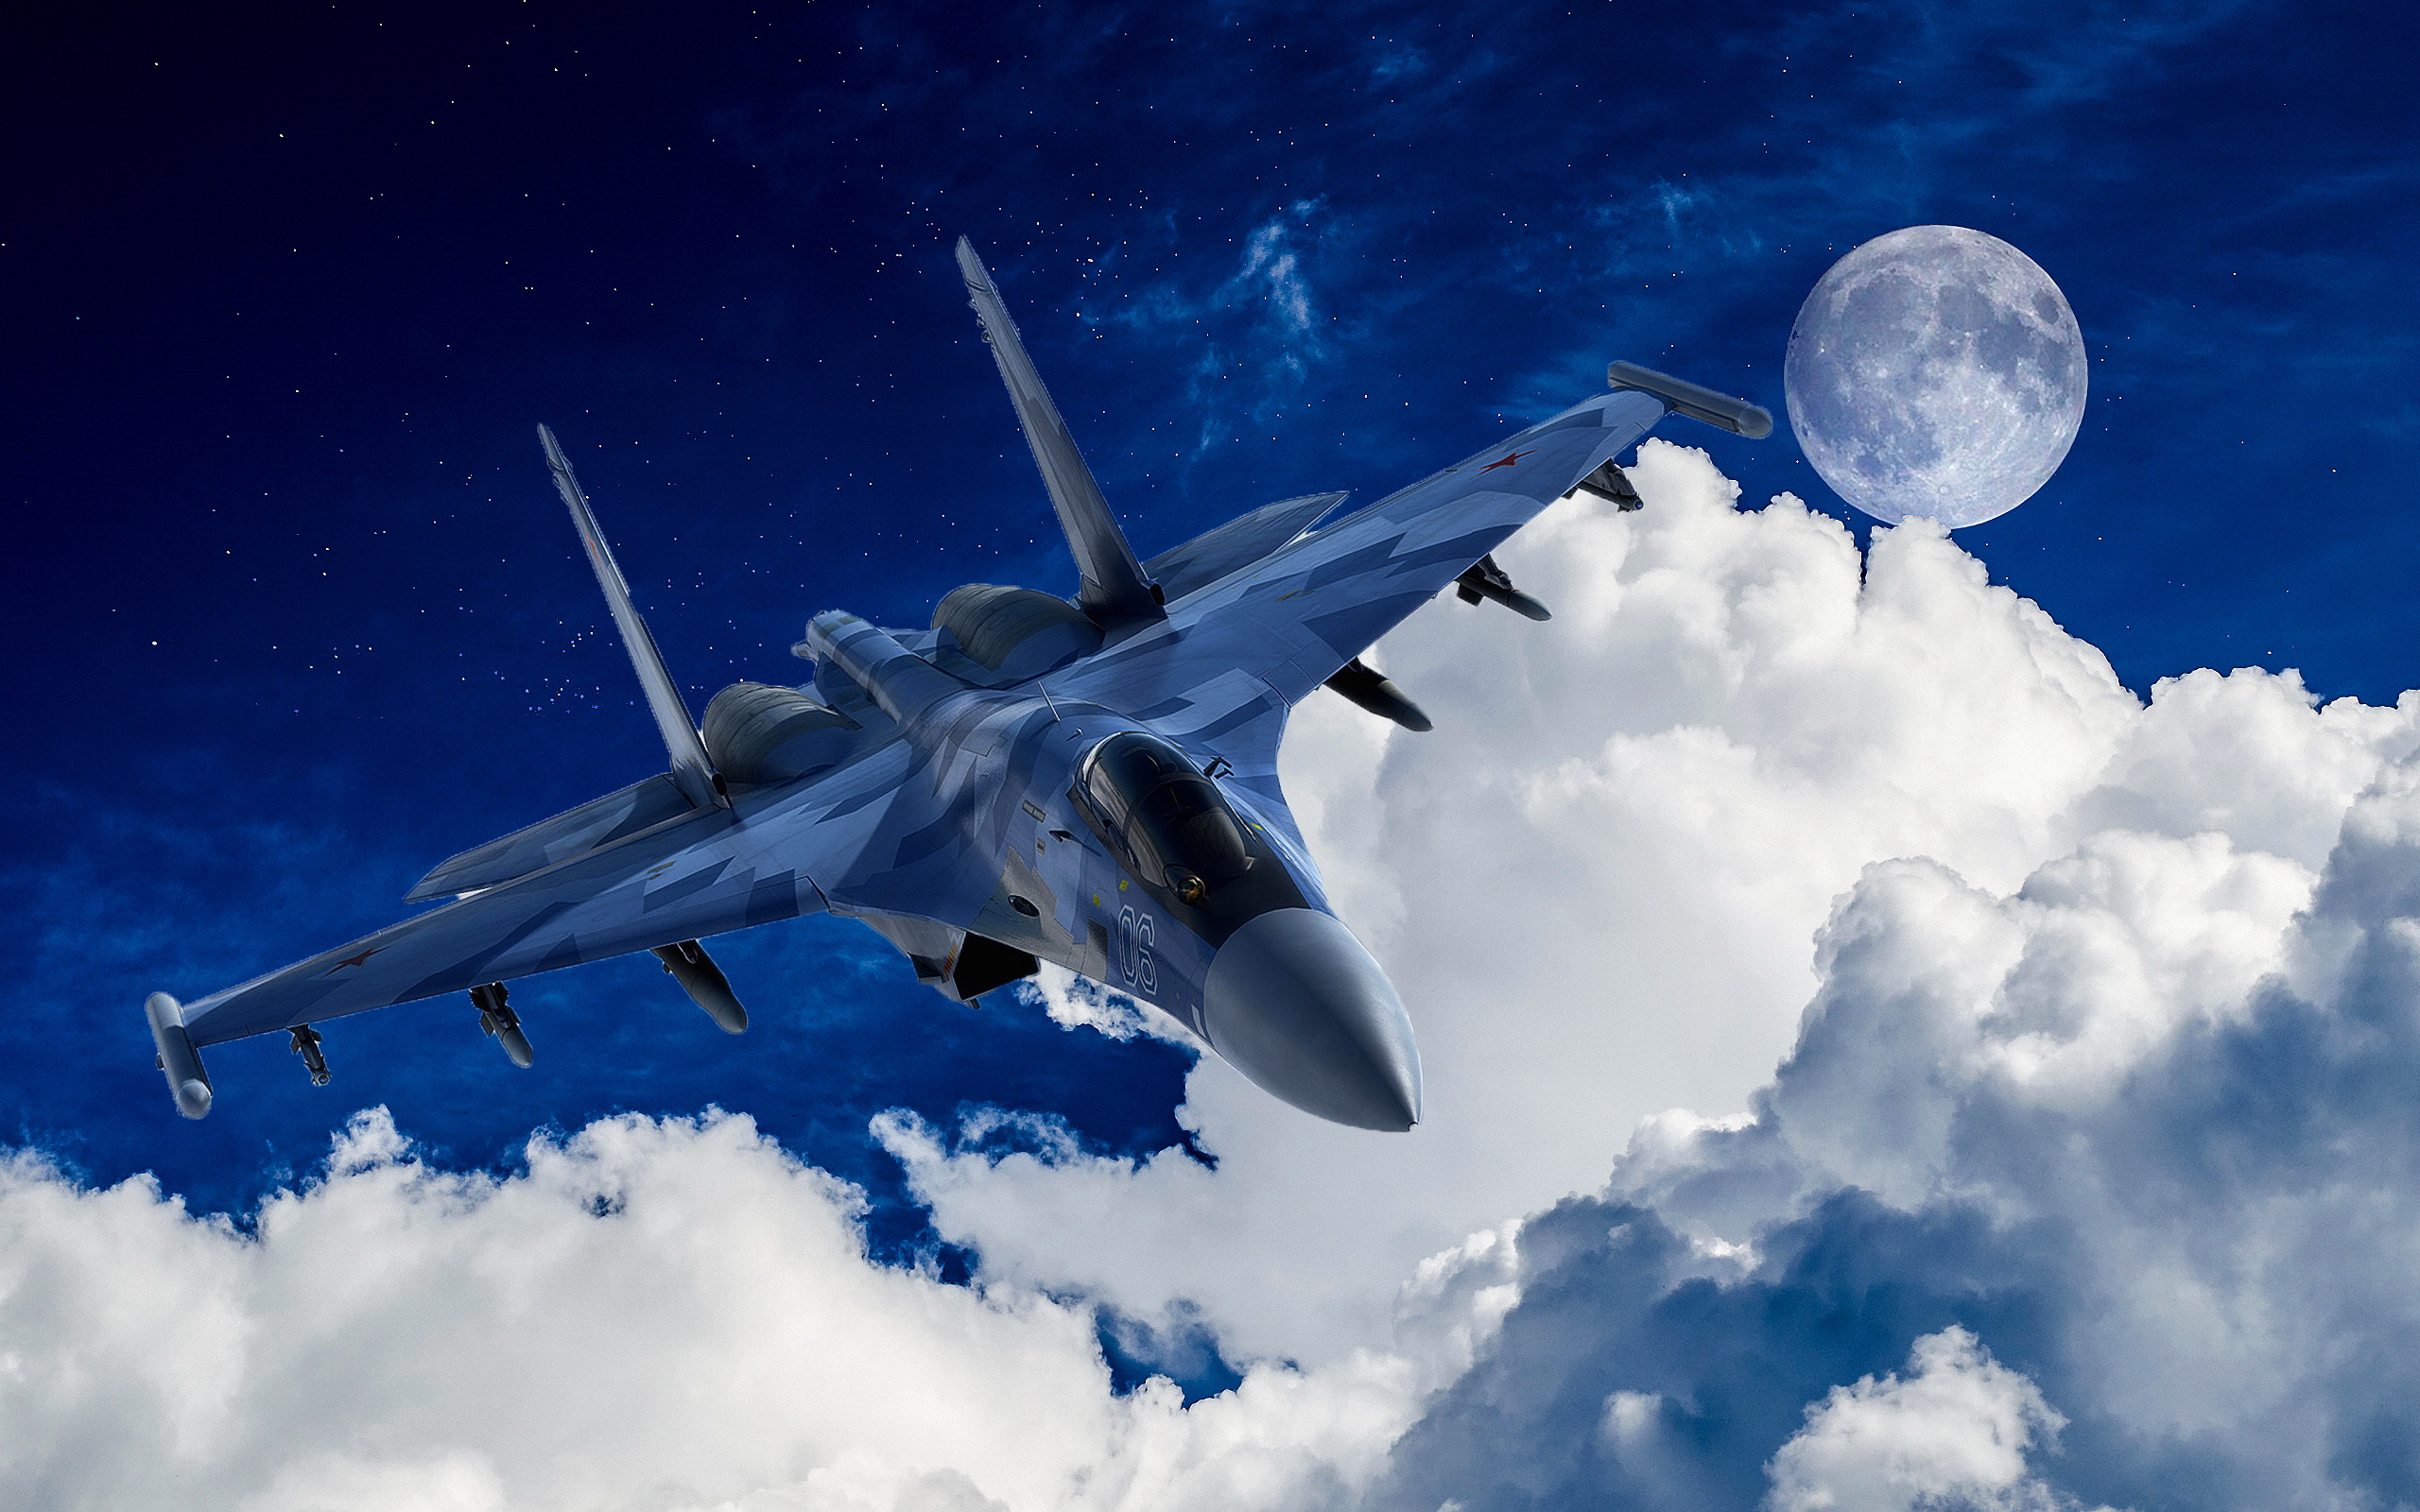 jet fighters, sukhoi su 35, military, air force, aircraft